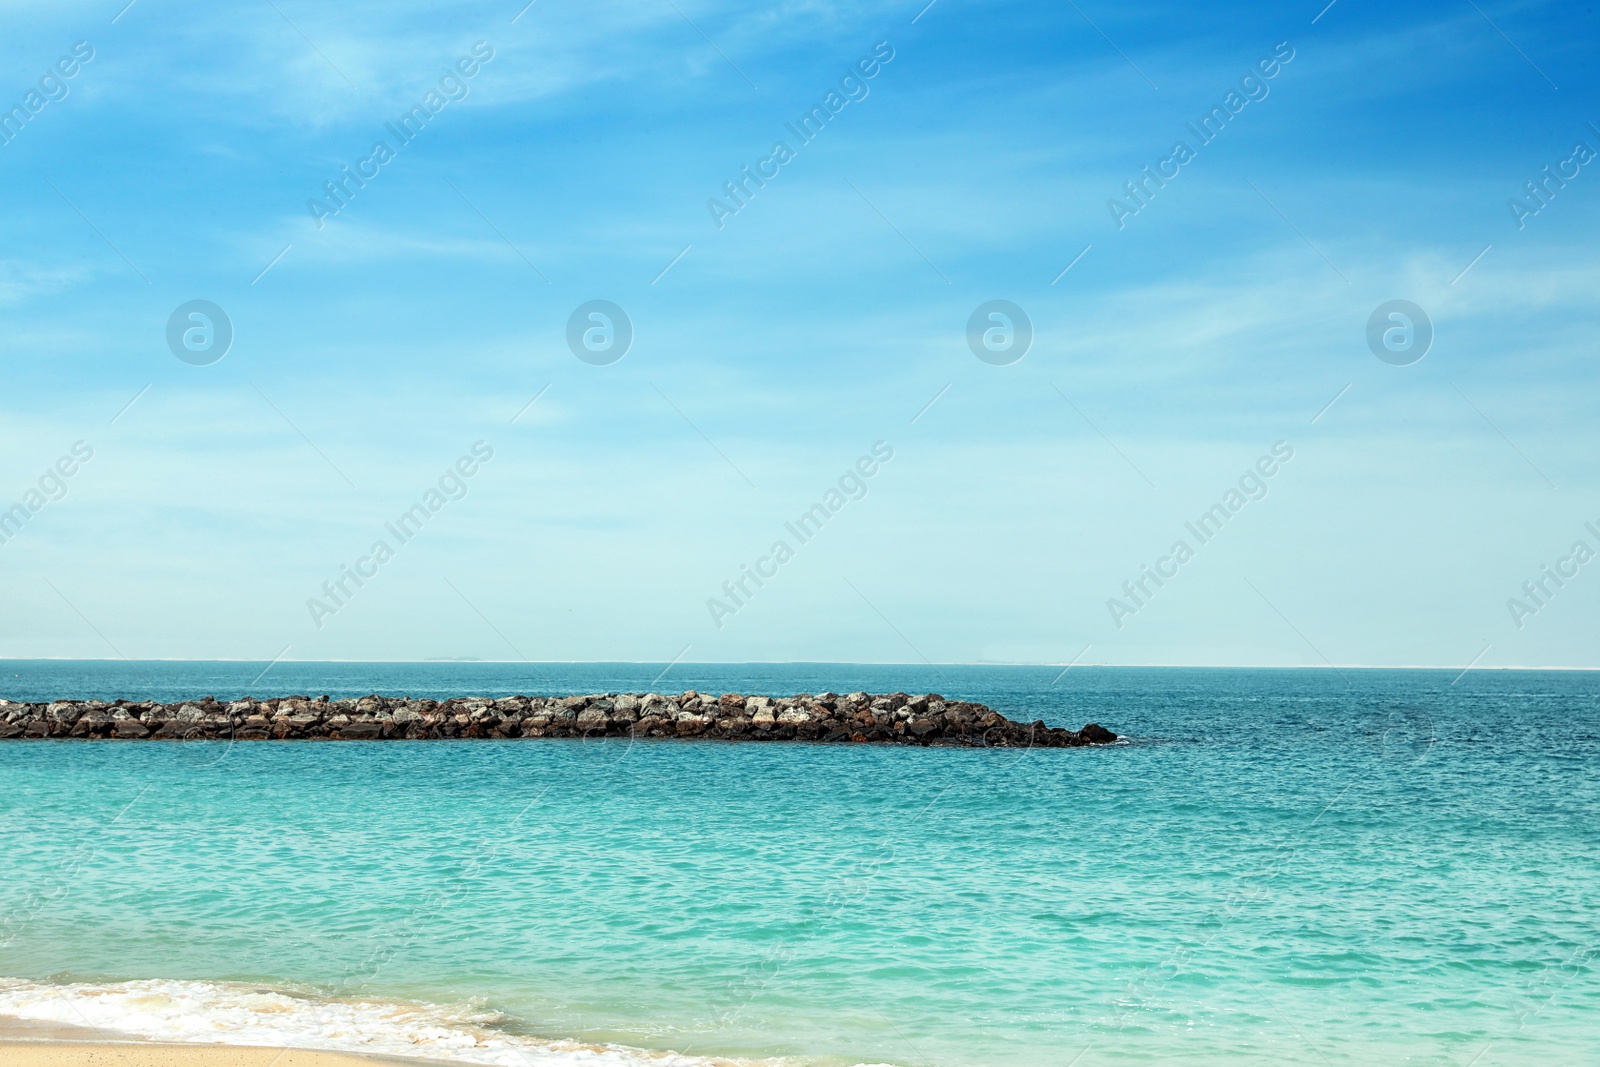 Photo of Picturesque view of ocean with rock breakwater on sunny day